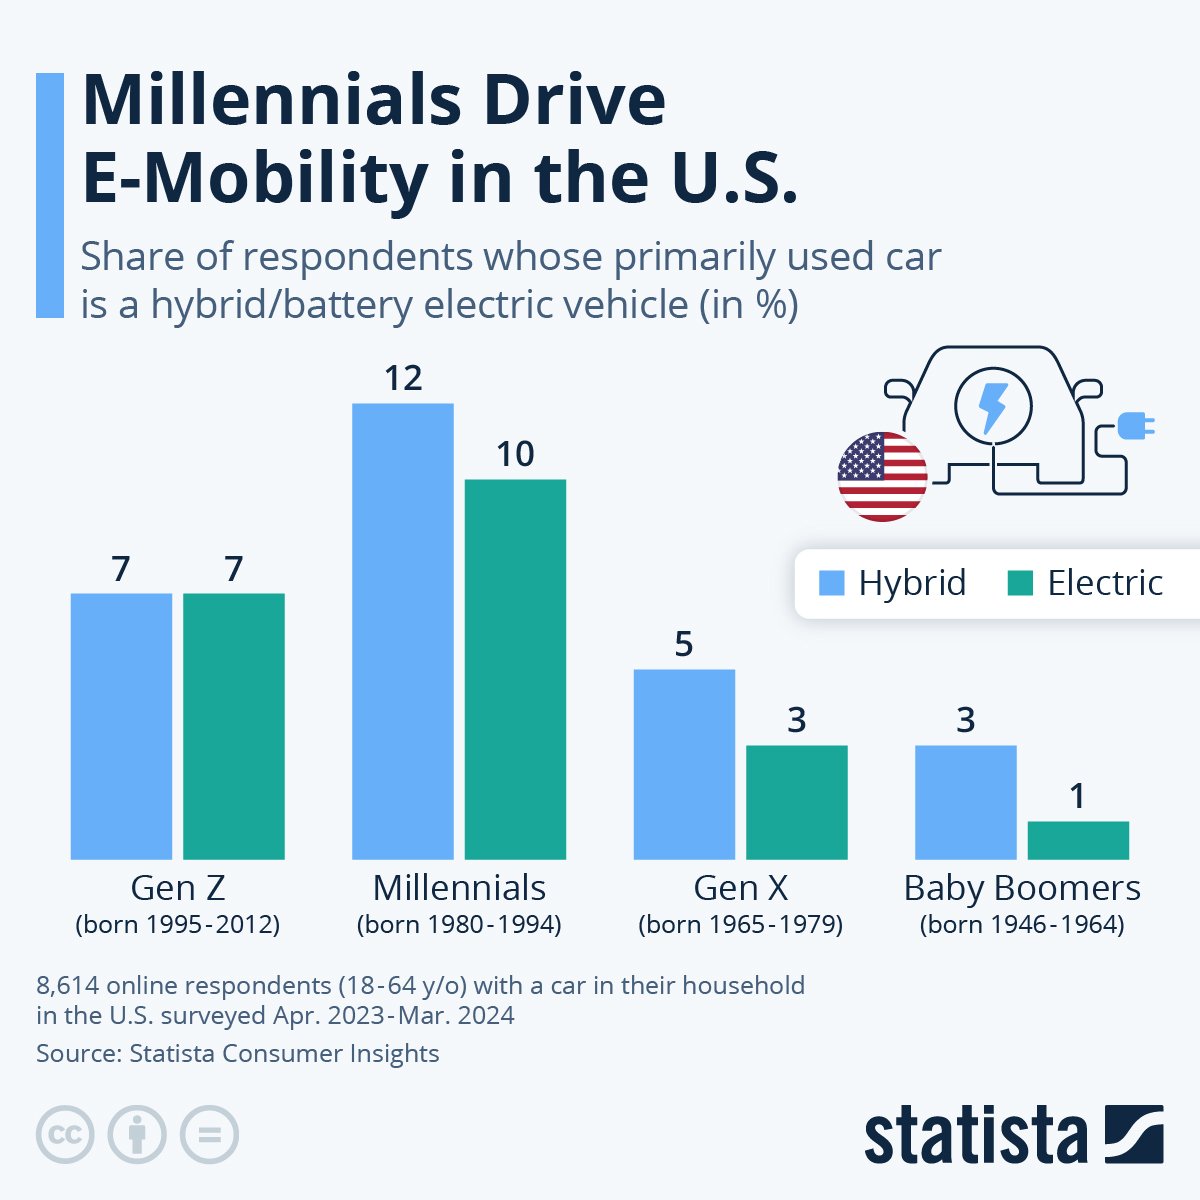 A chart by Statista showing “Millennials Drive E-mobility in the U.S" respondent results.